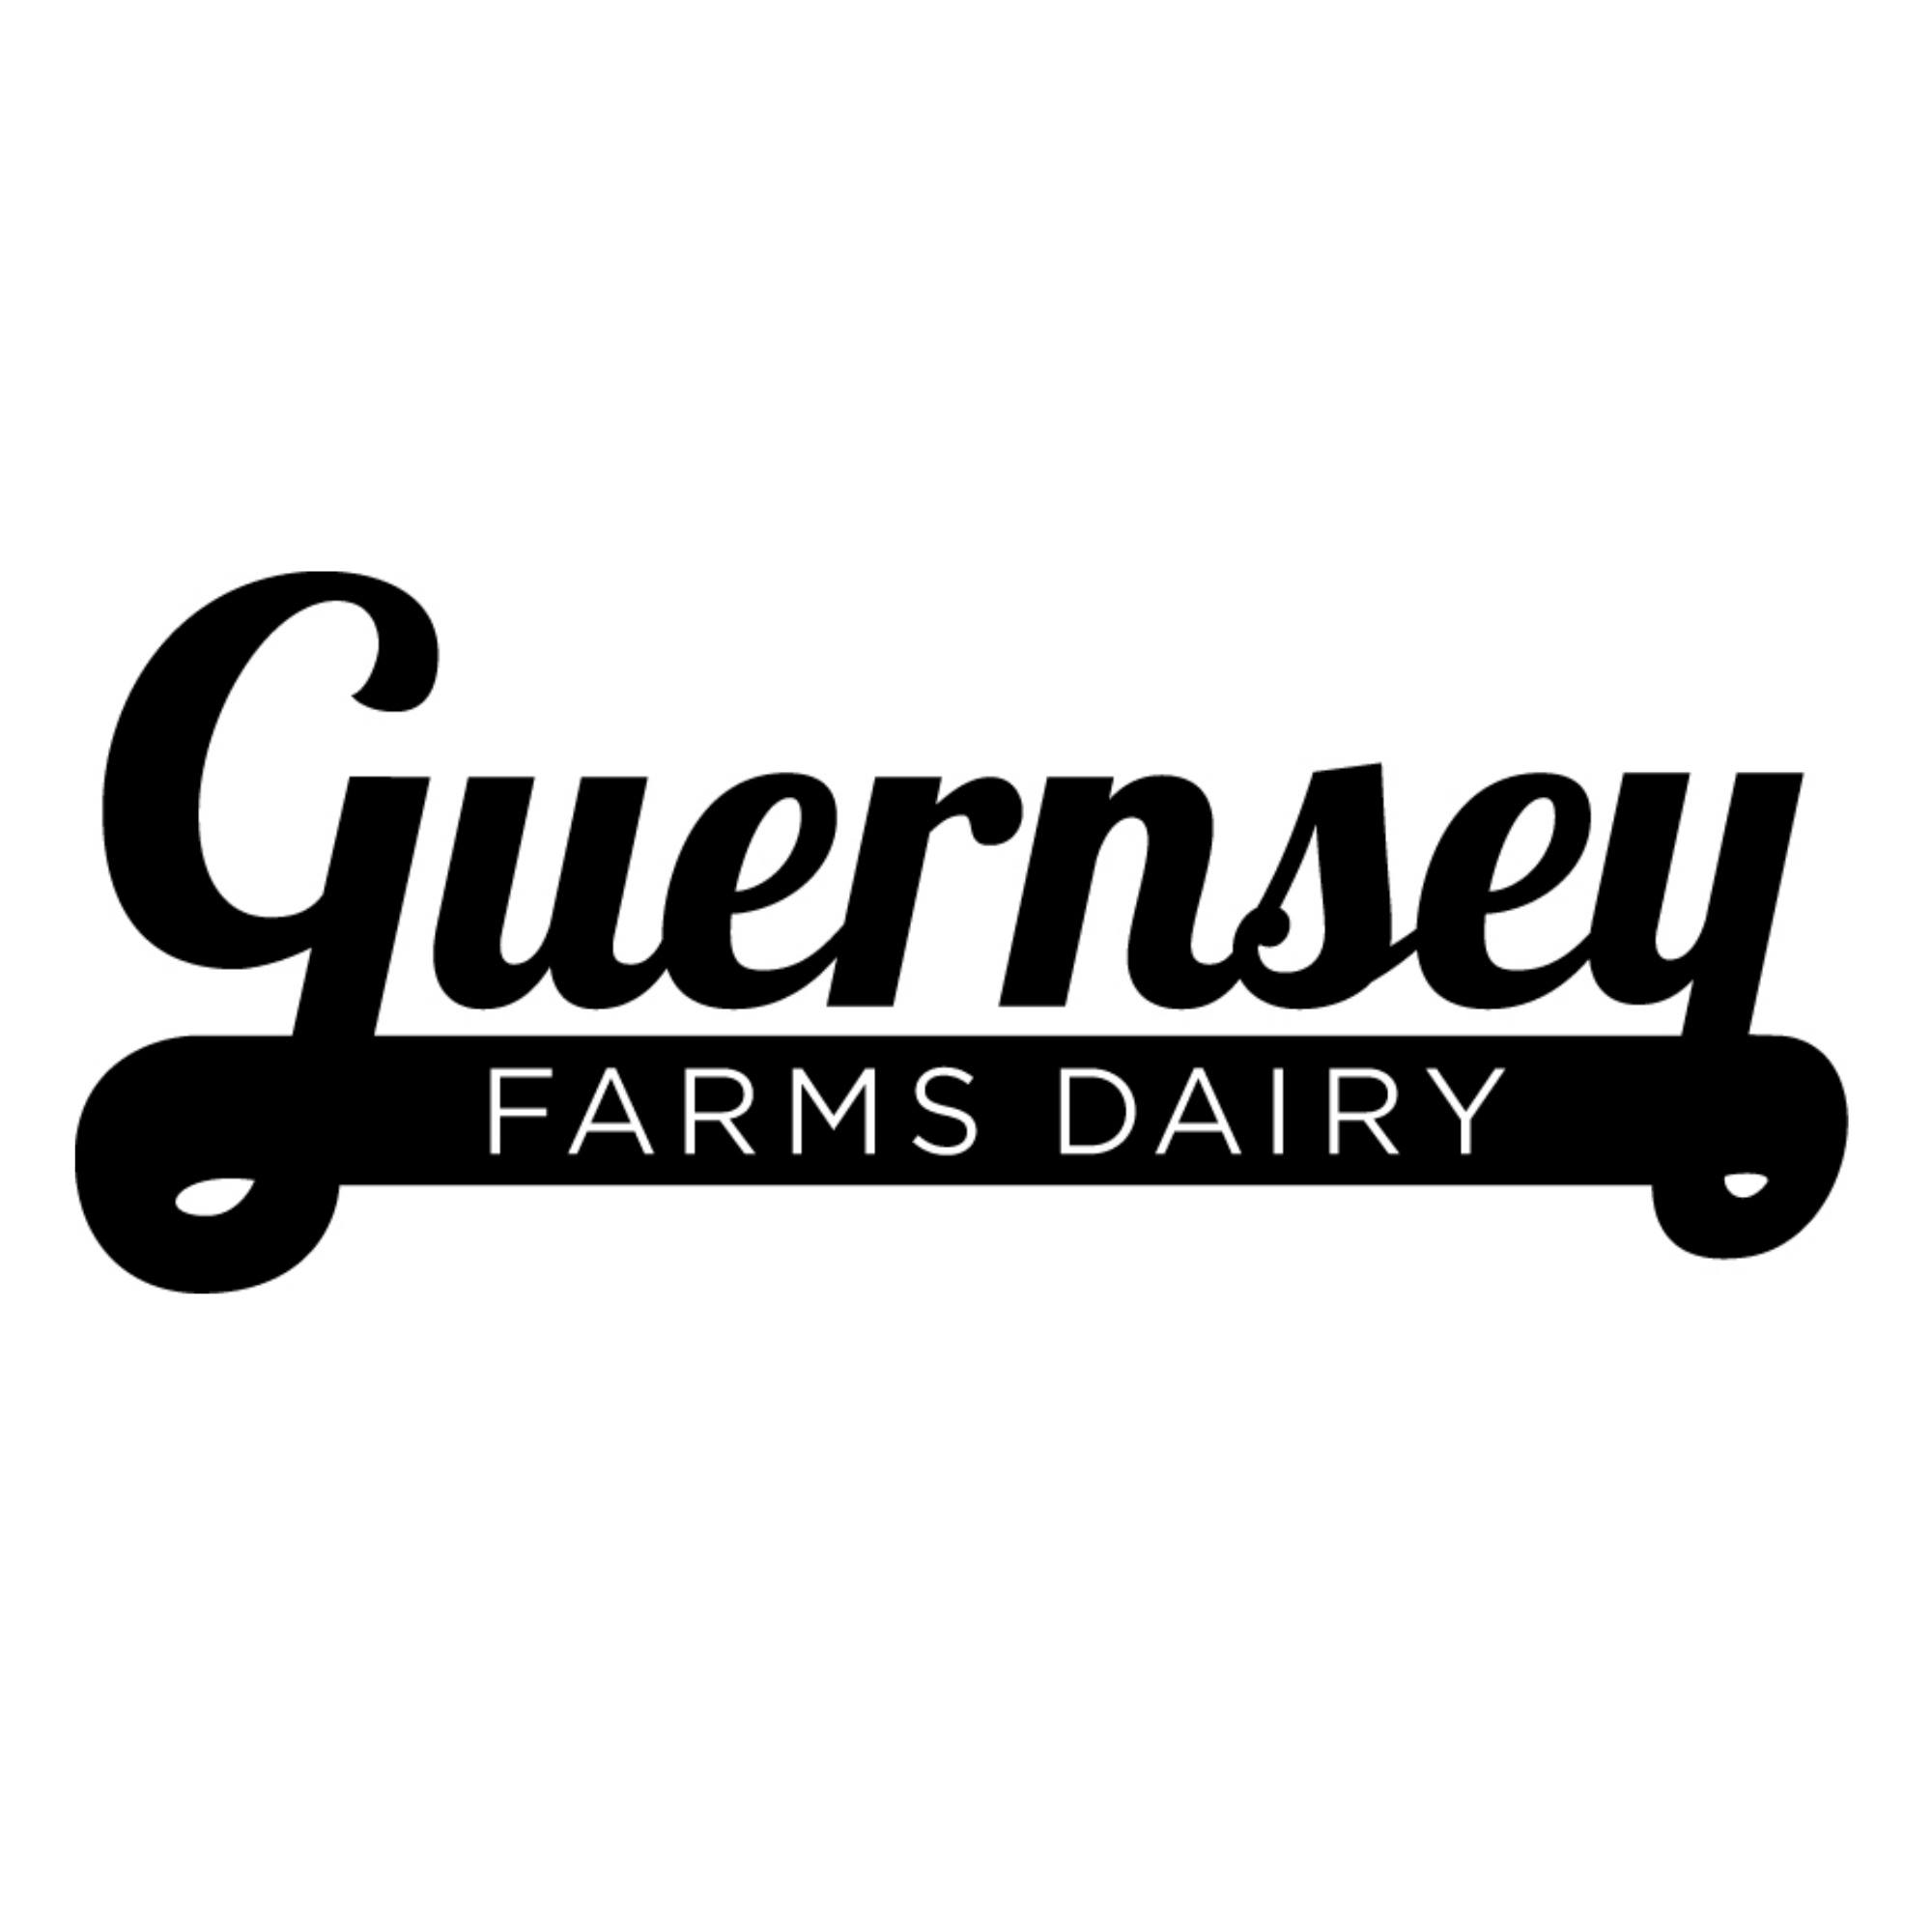 Business logo of Guernsey Farms Dairy